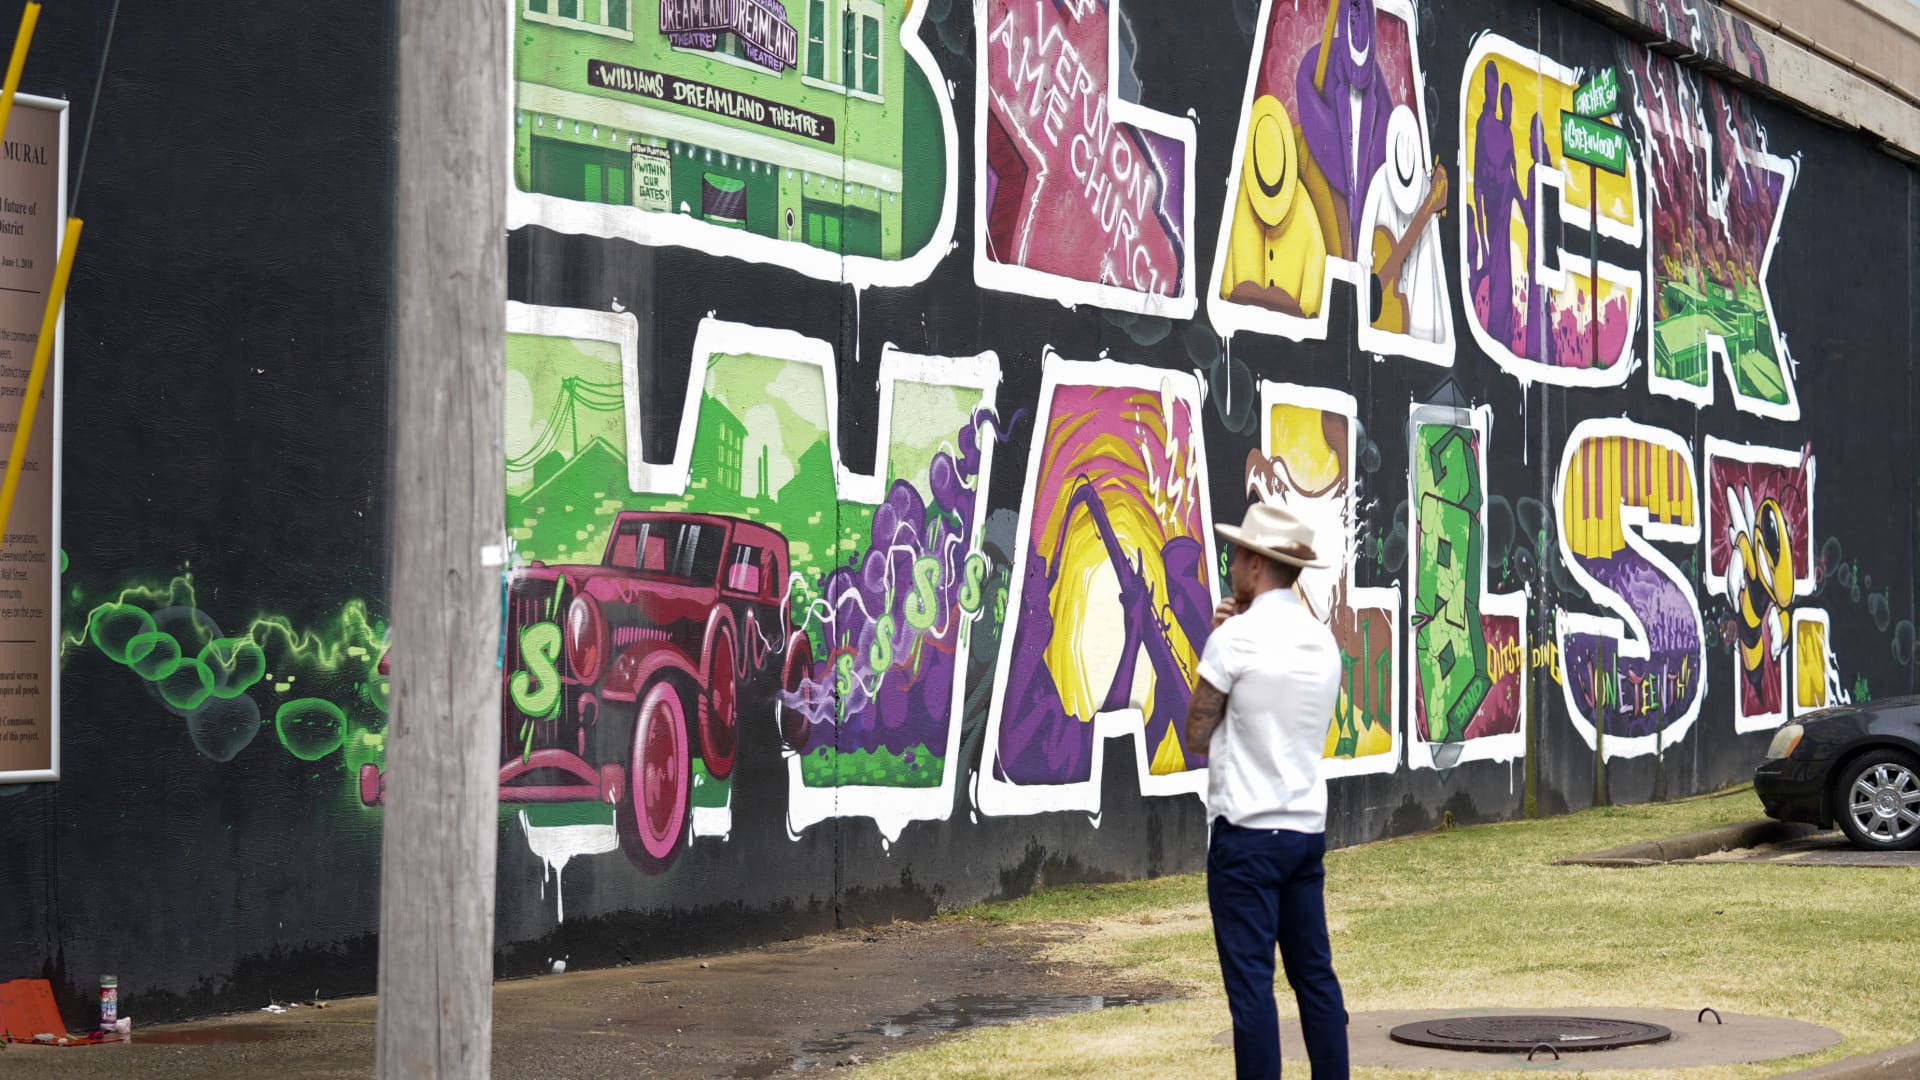 A pedestrian stands in front of the Black Wall Street Mural in the Greenwood District of Tulsa Oklahoma, U.S., on Friday, June 19, 2020.